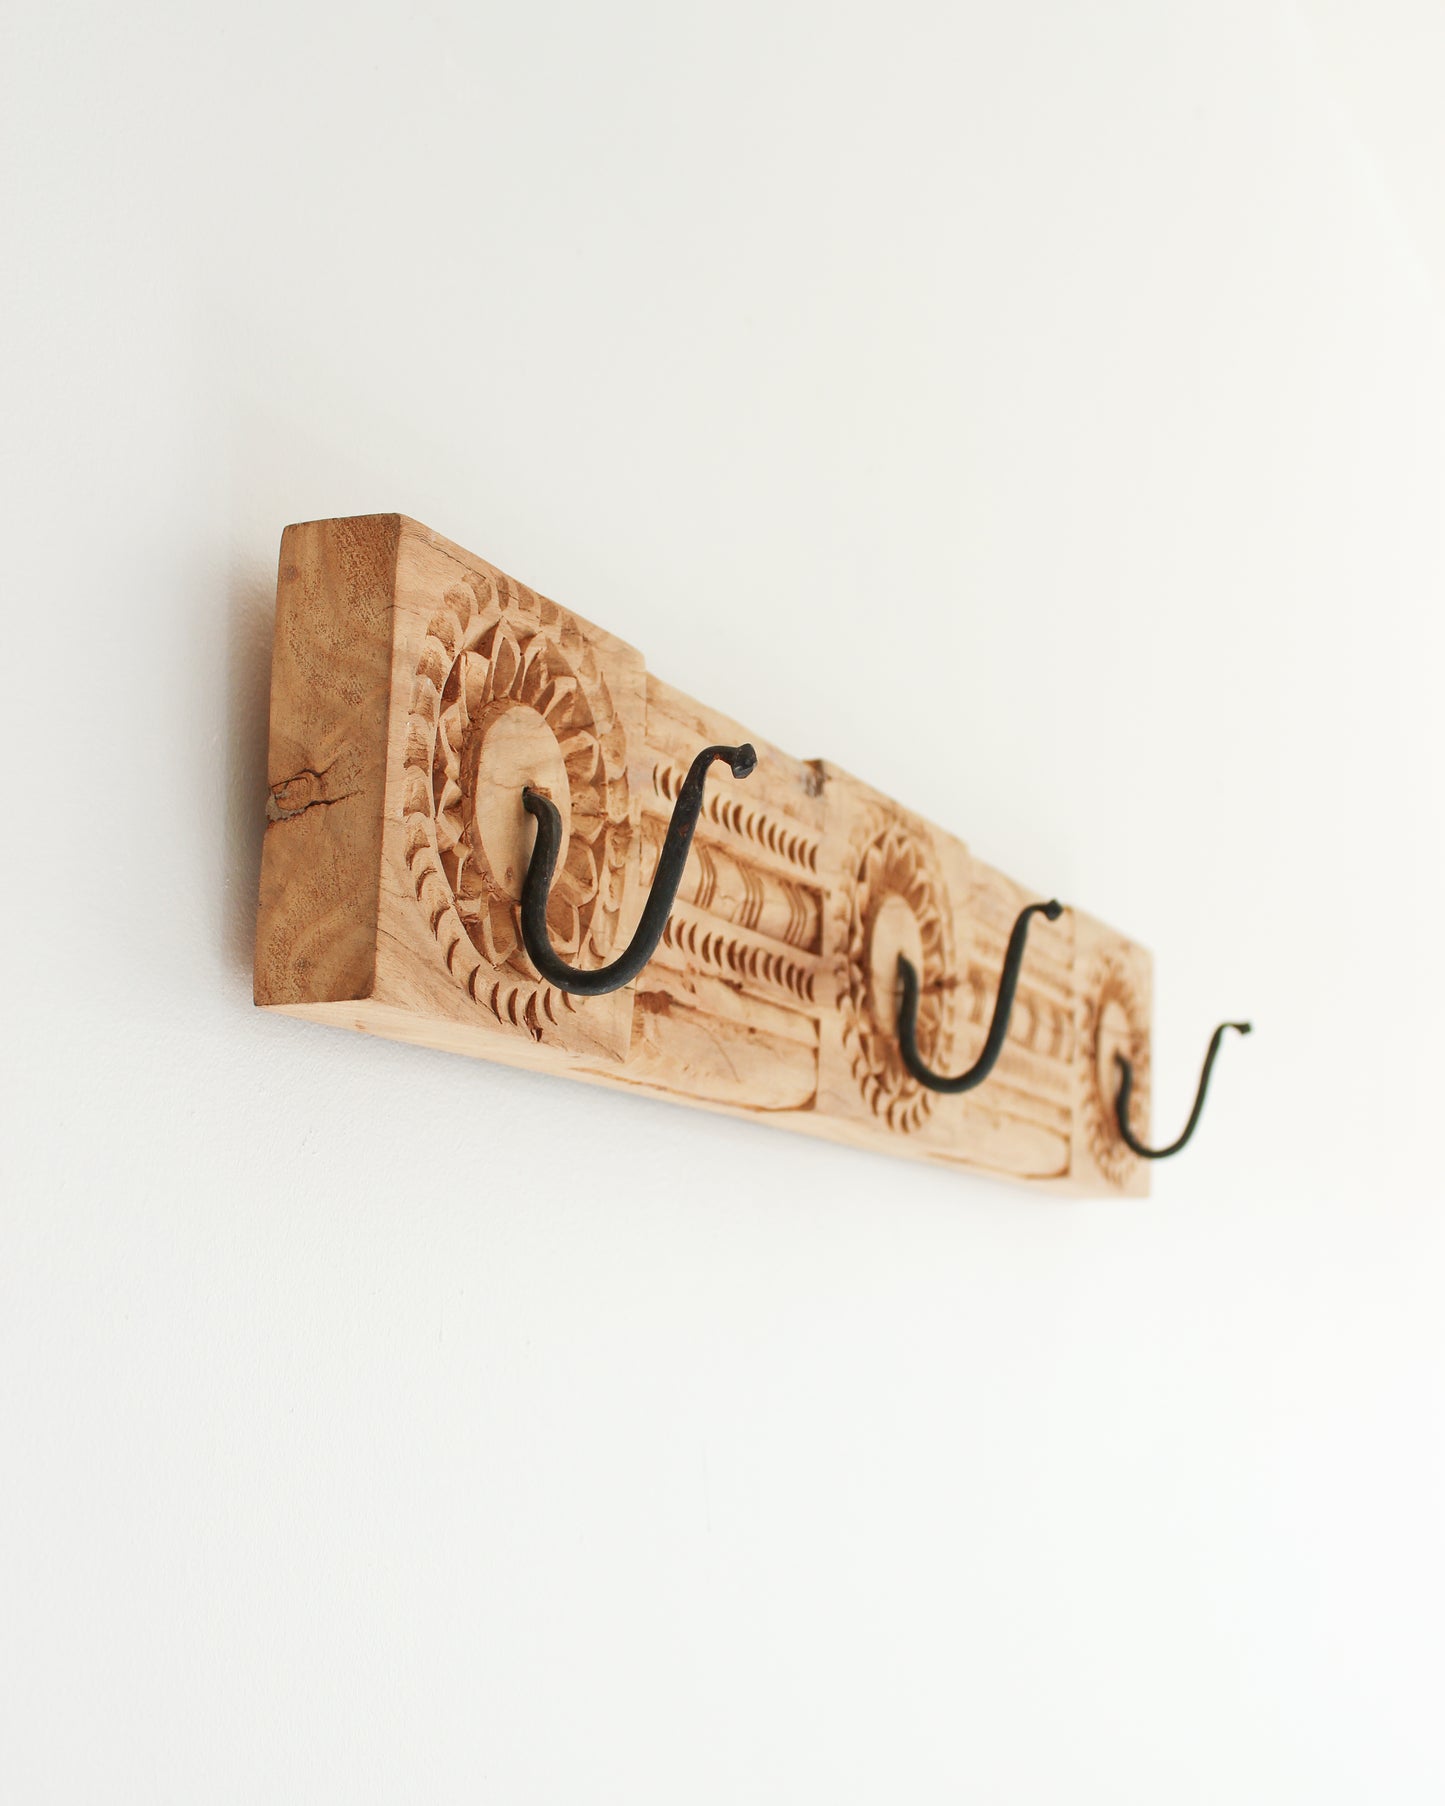 Hand Carved Wall Hanger